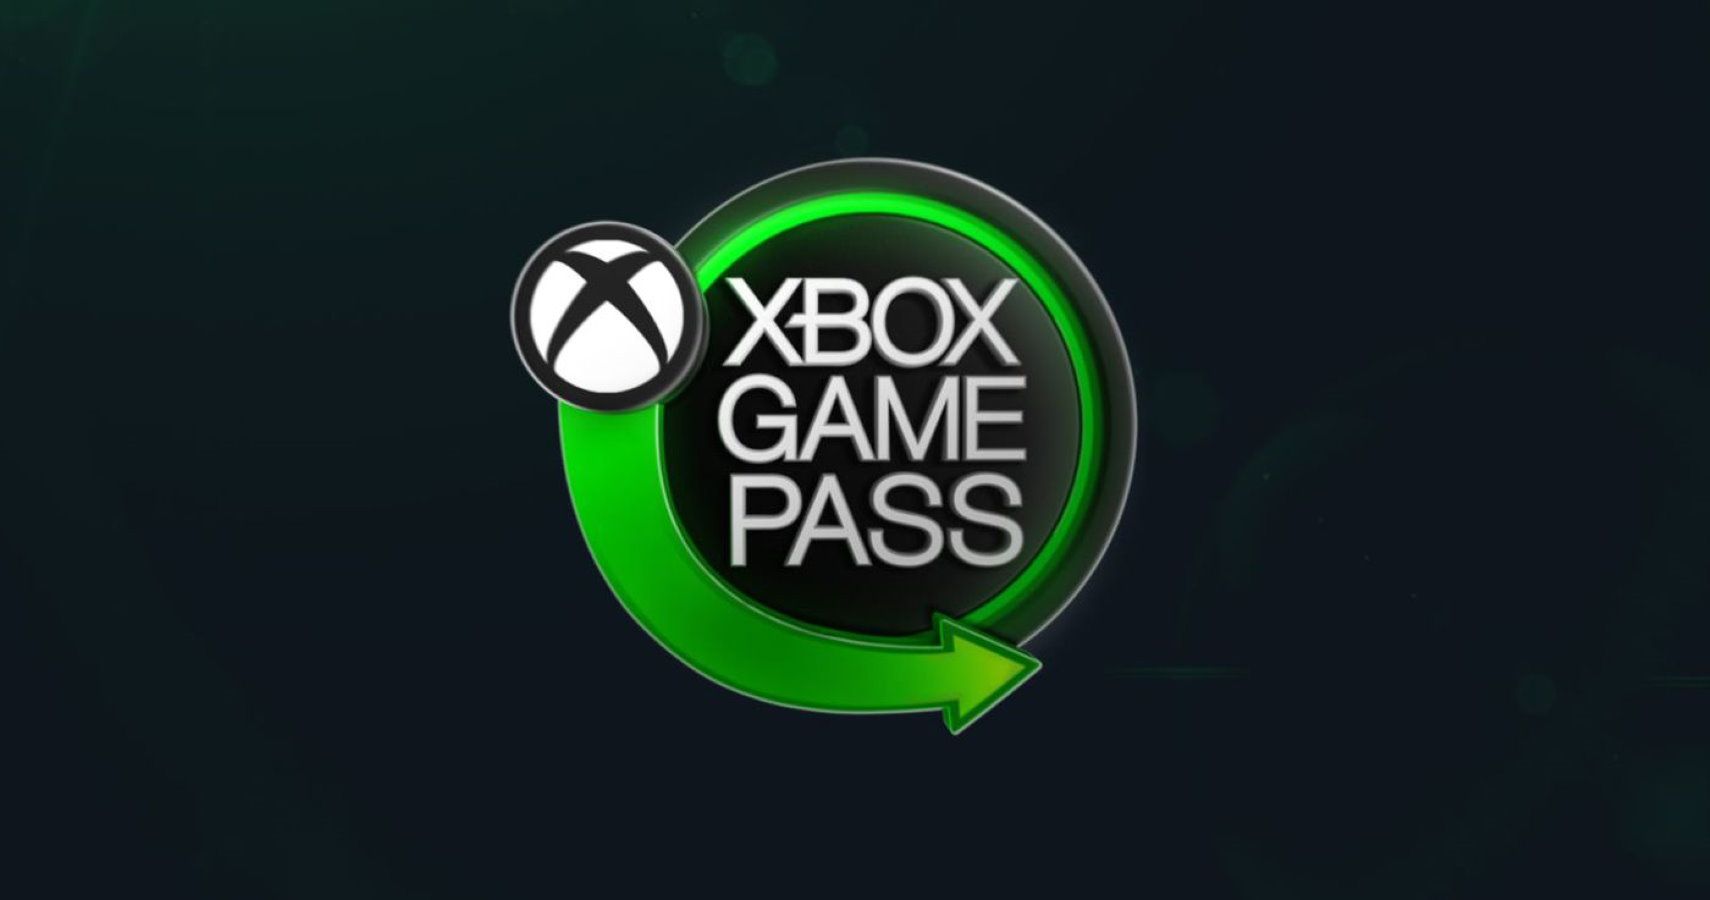 upcoming gamews for game pass